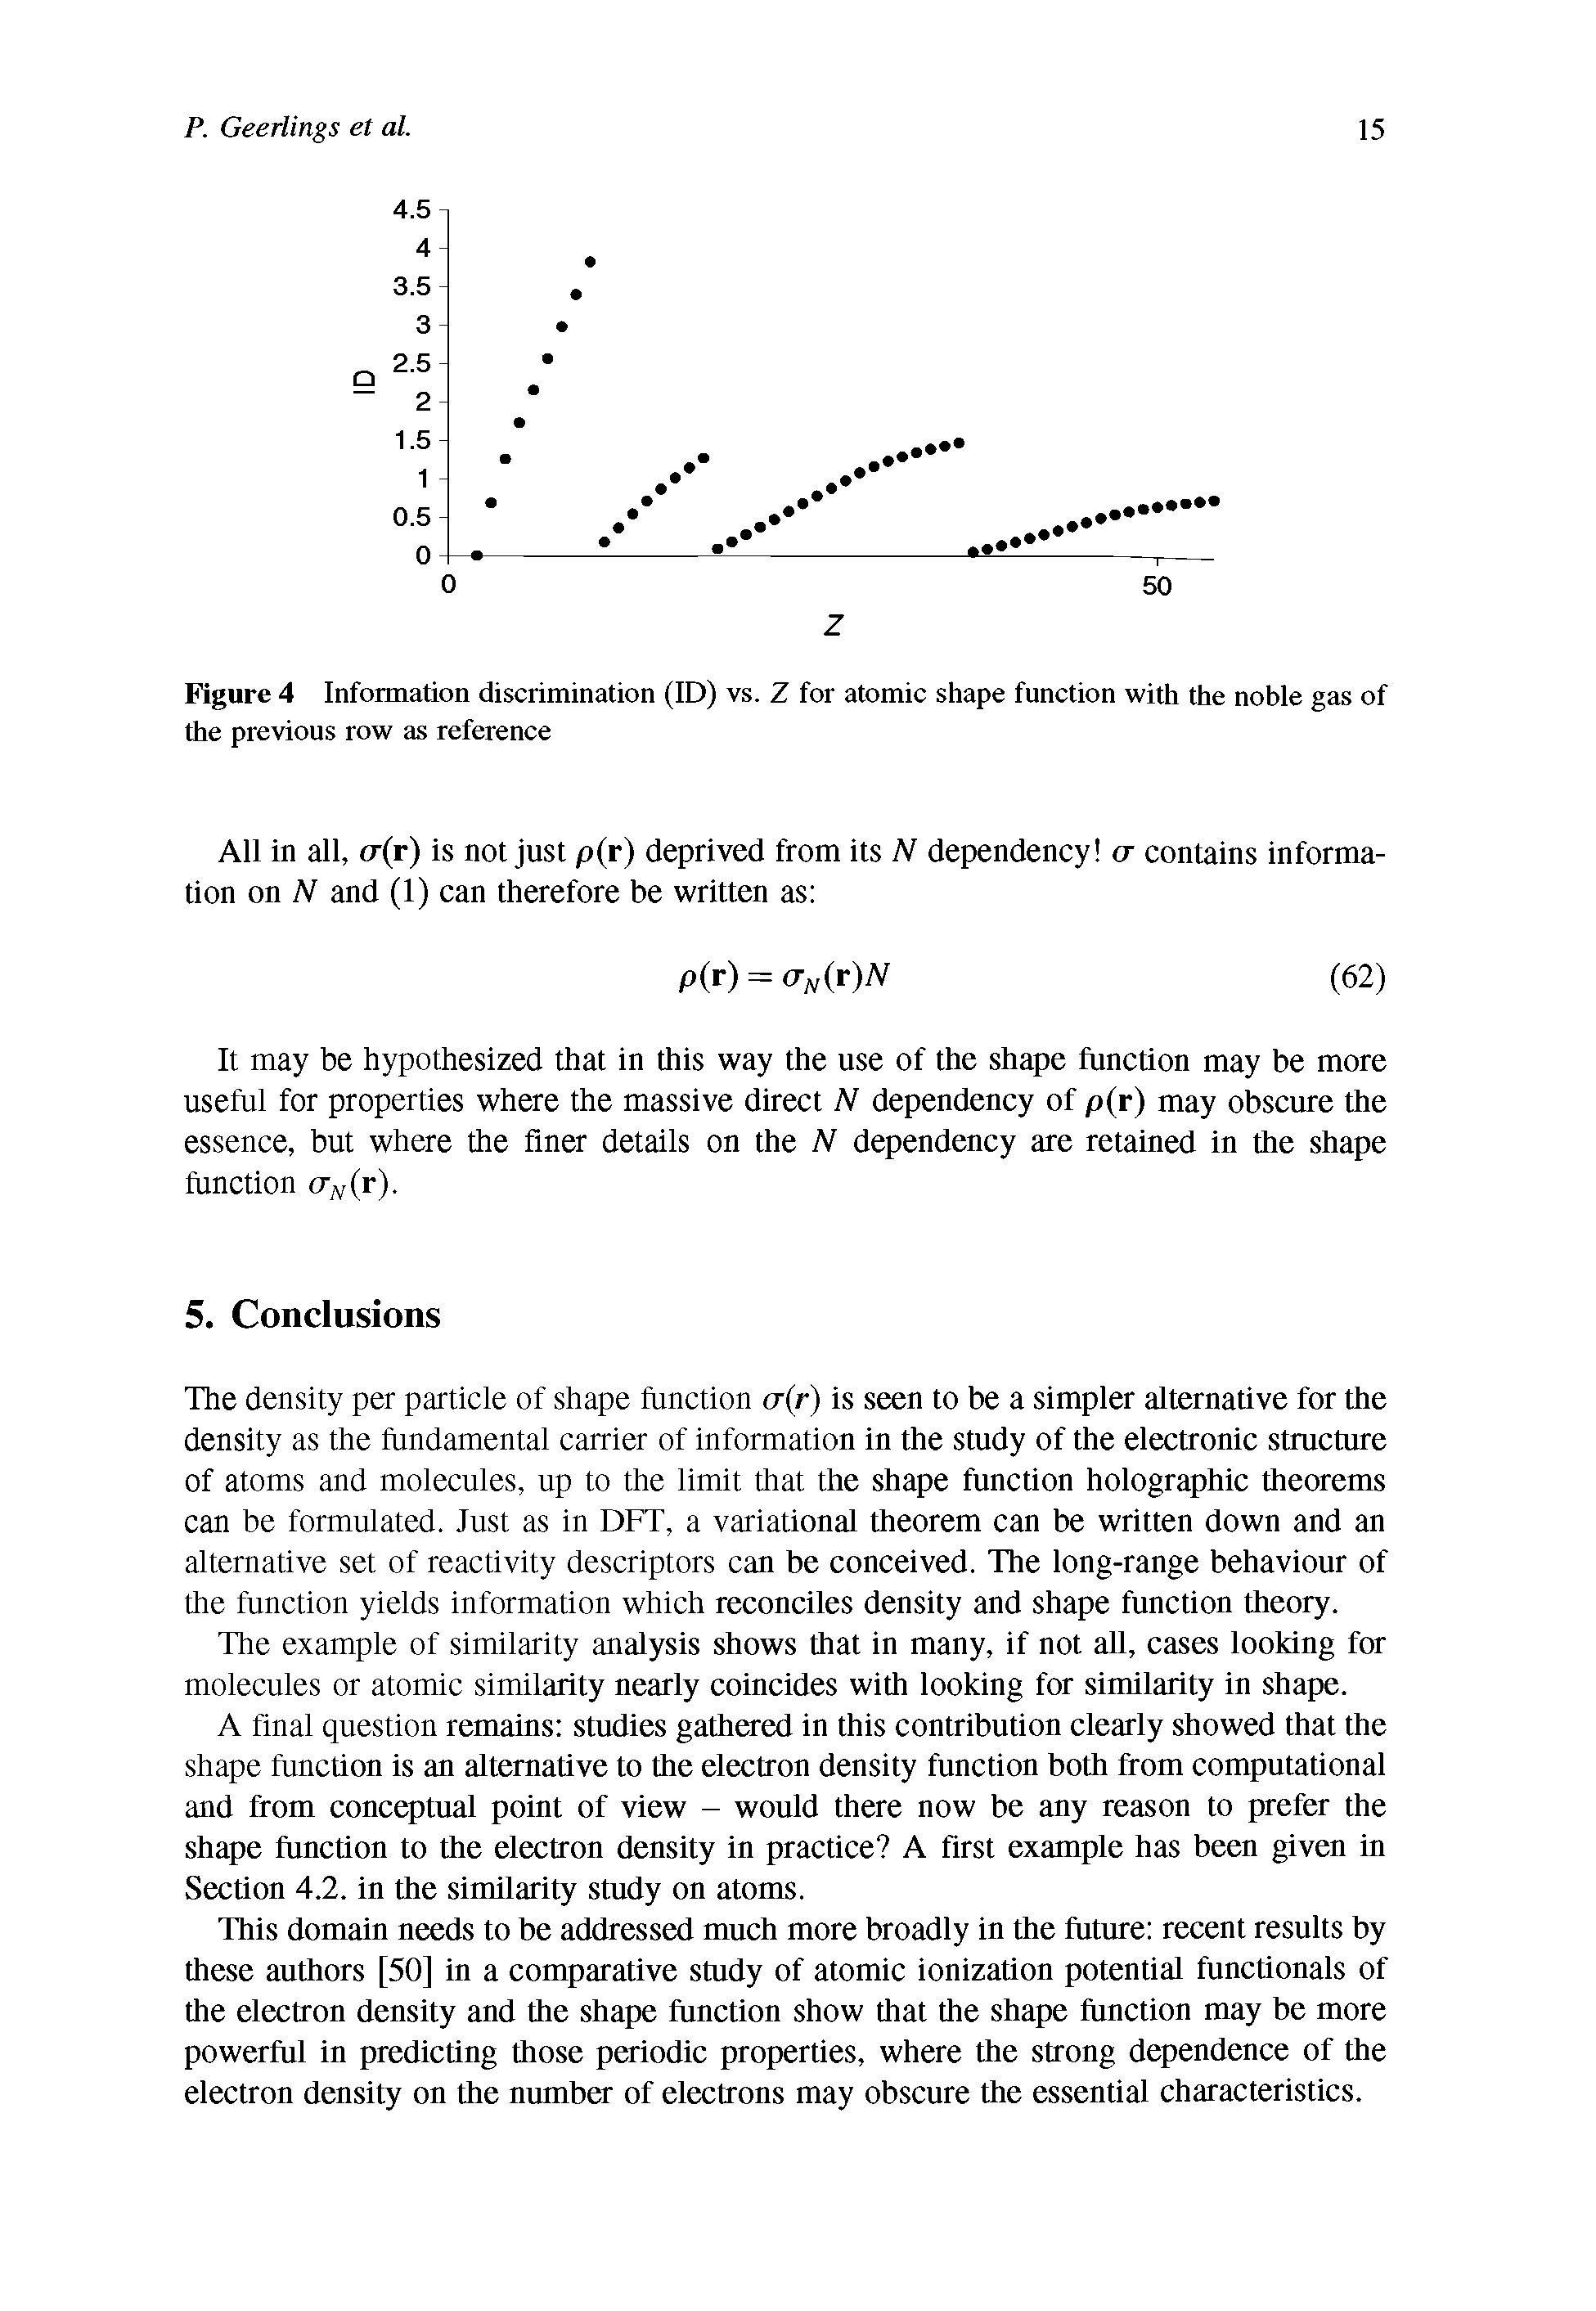 Figure 4 Information discrimination (ID) vs. Z for atomic shape function with the noble gas of the previous row as reference...